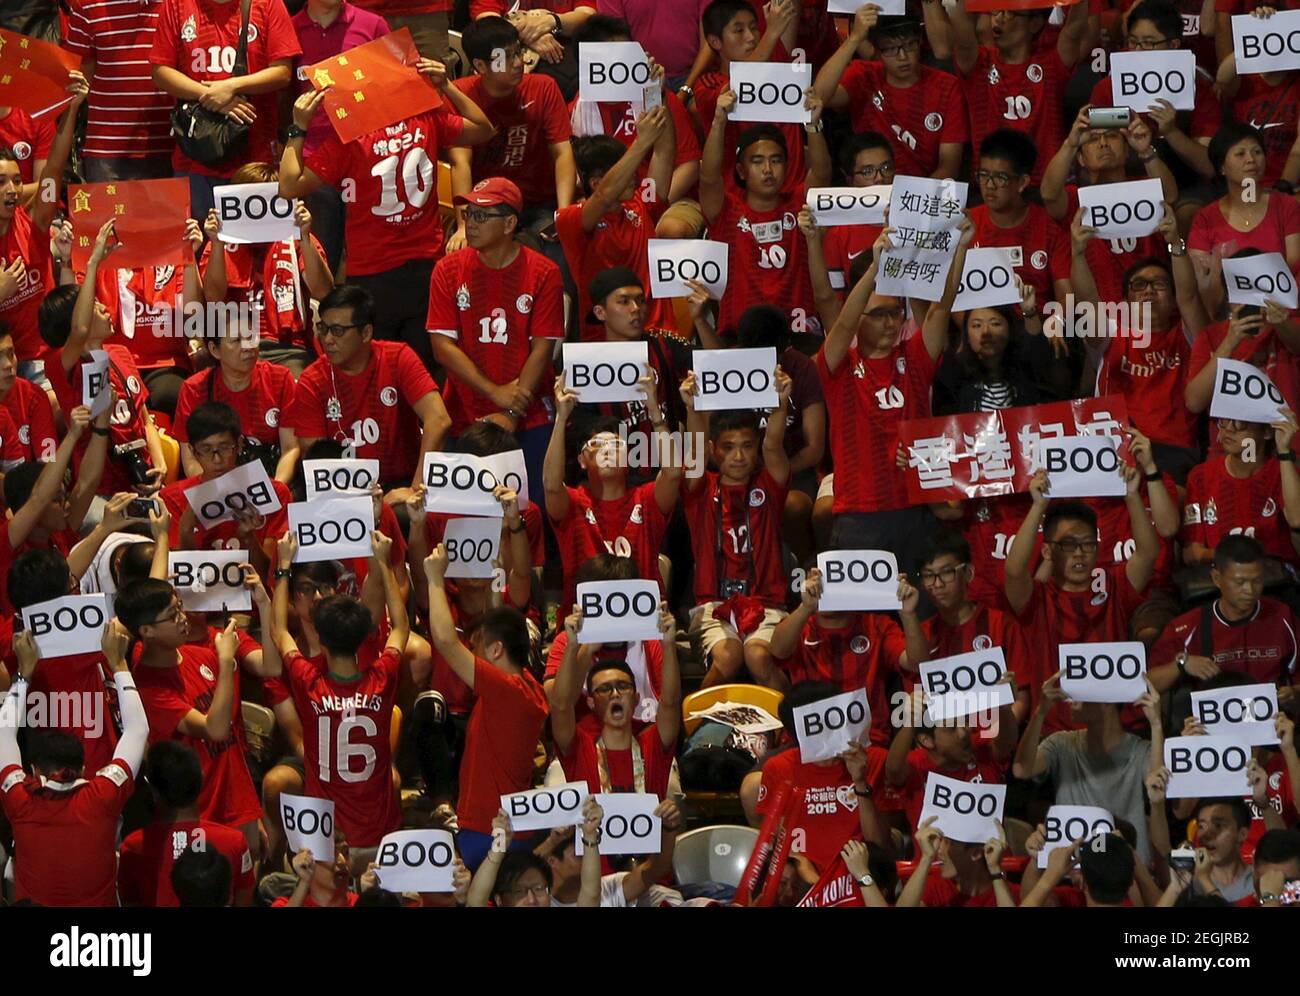 Hong Kong fans hold 'boo' signs, during the Chinese national anthem at the 2018 World Cup qualifying match between Hong Kong and China, in Hong Kong, China November 17, 2015.   REUTERS/Bobby Yip   Picture Supplied by Action Images Stock Photo